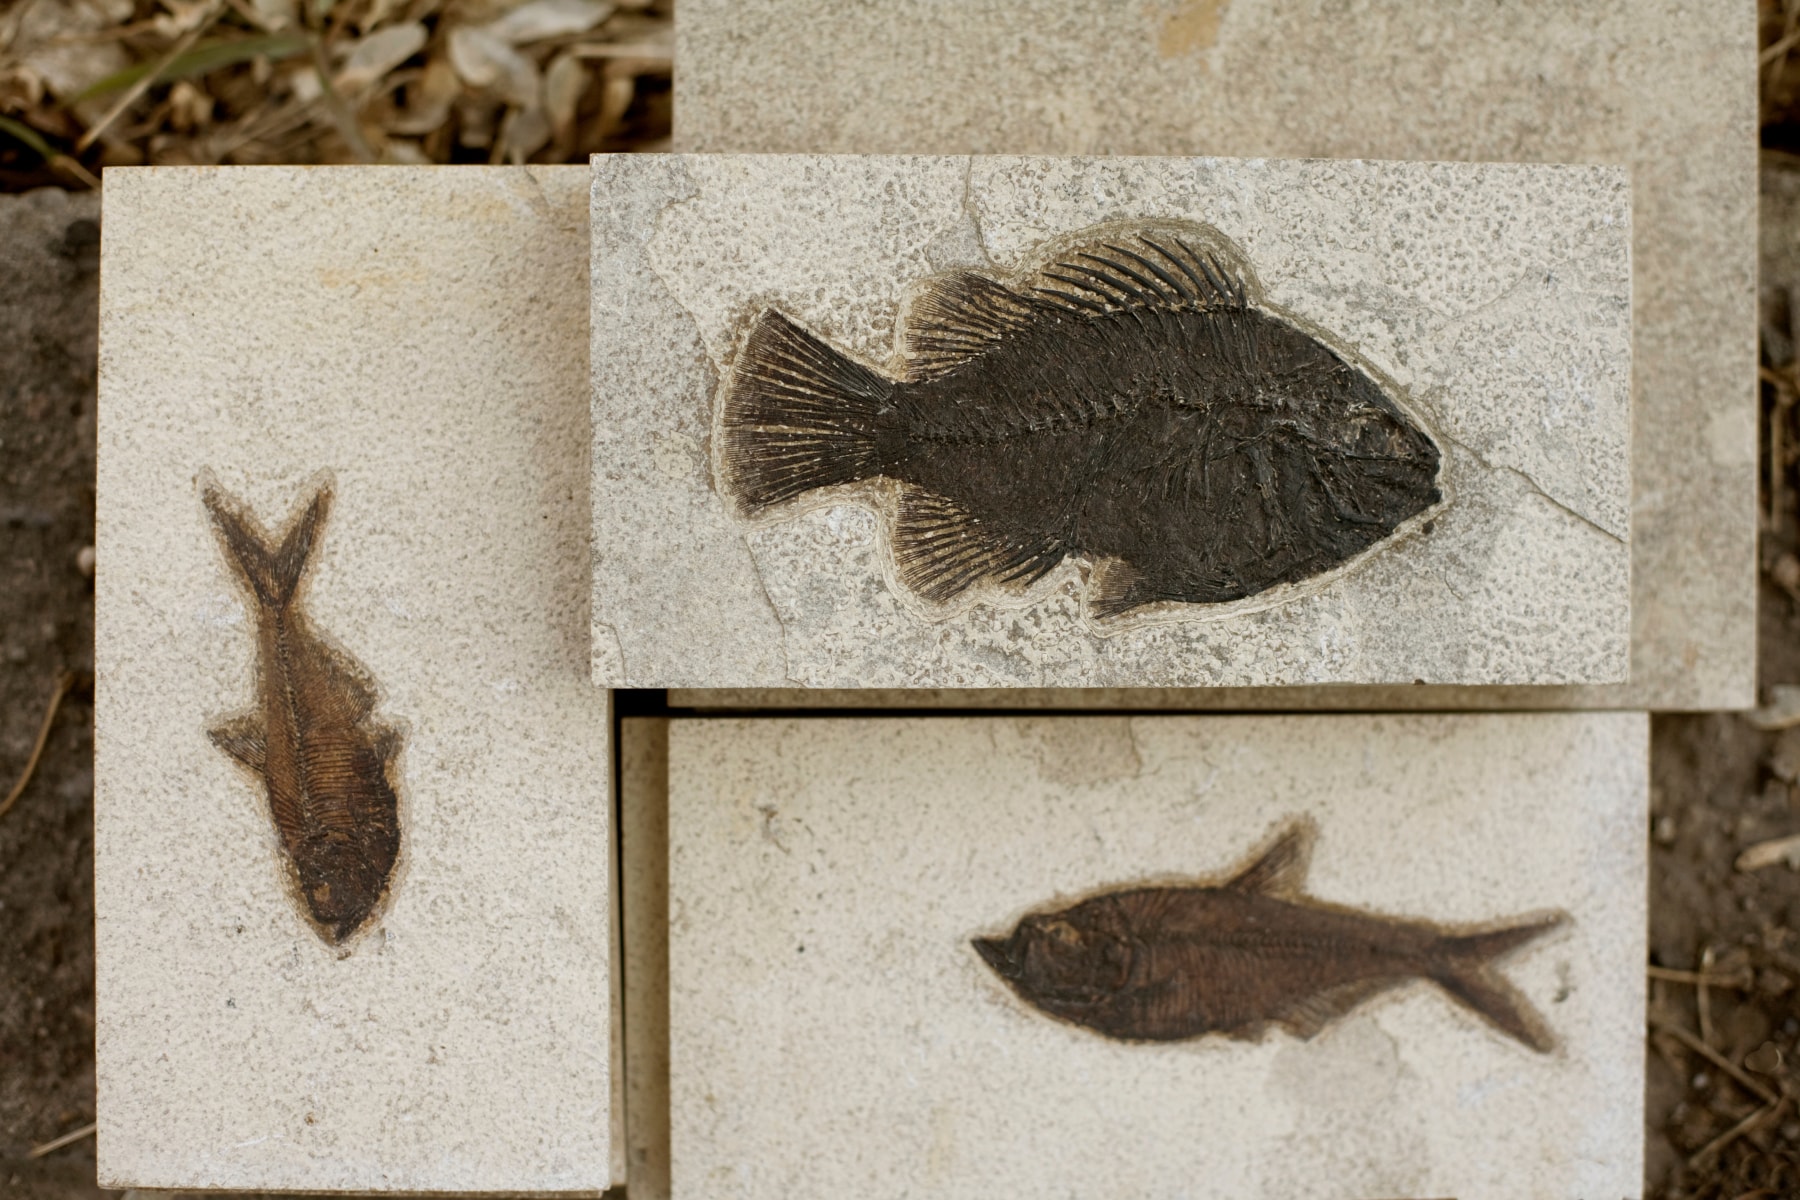 A collection of fossil fish tiles